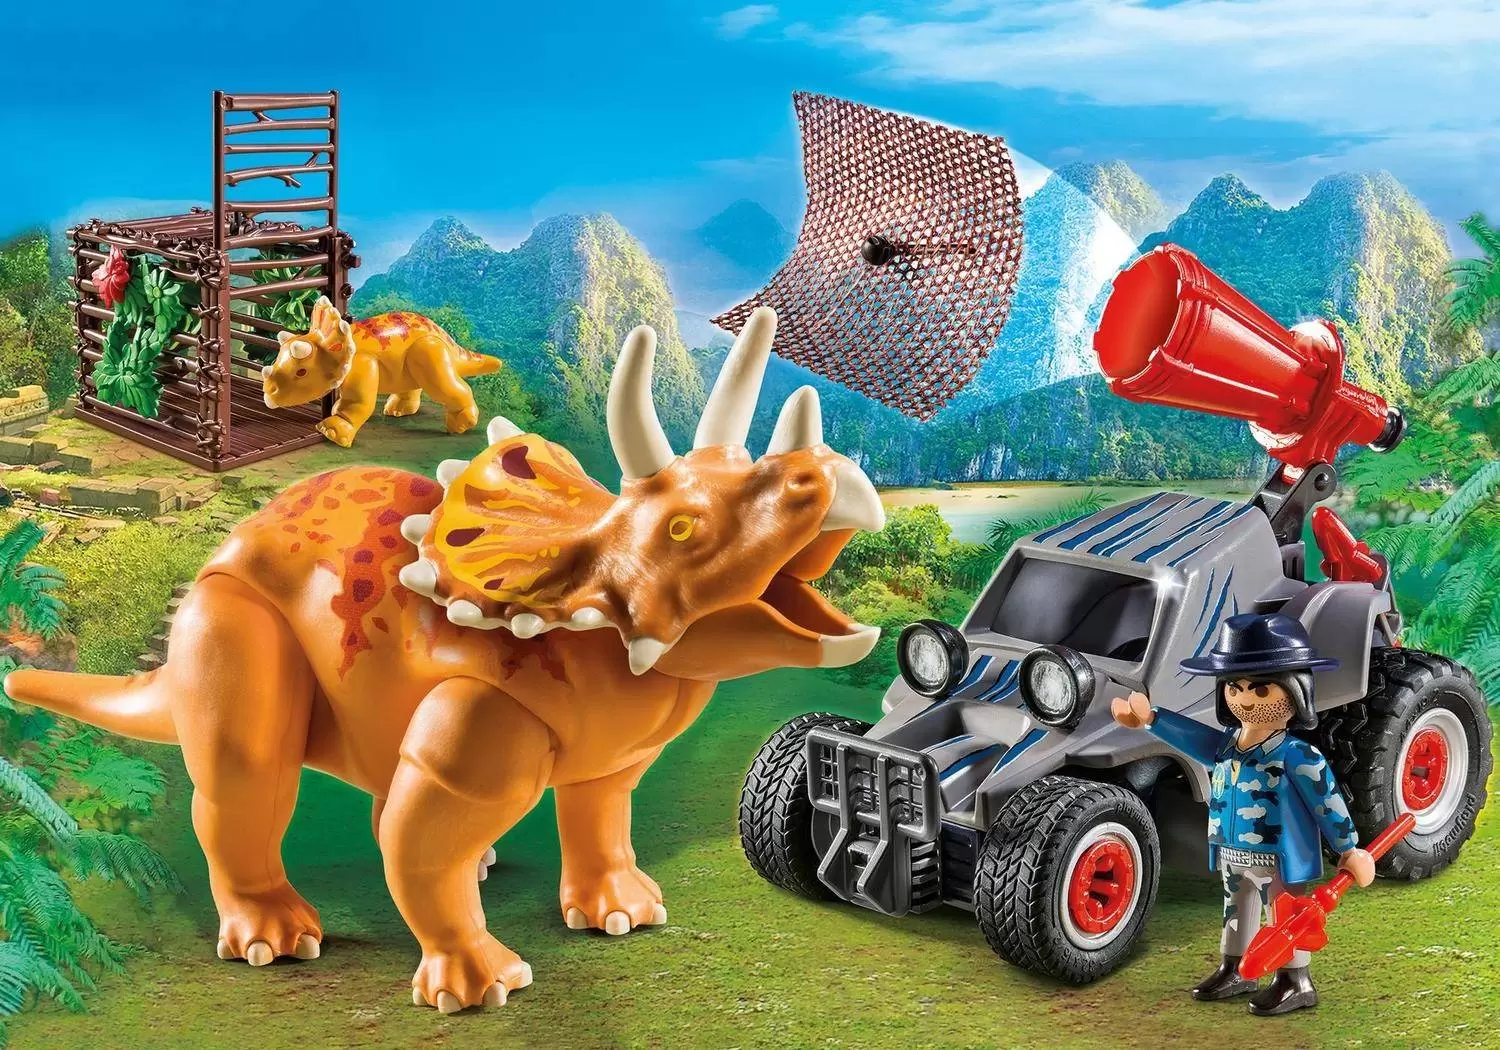 Enemy Quad with Triceratops - Playmobil dinosaures 9434